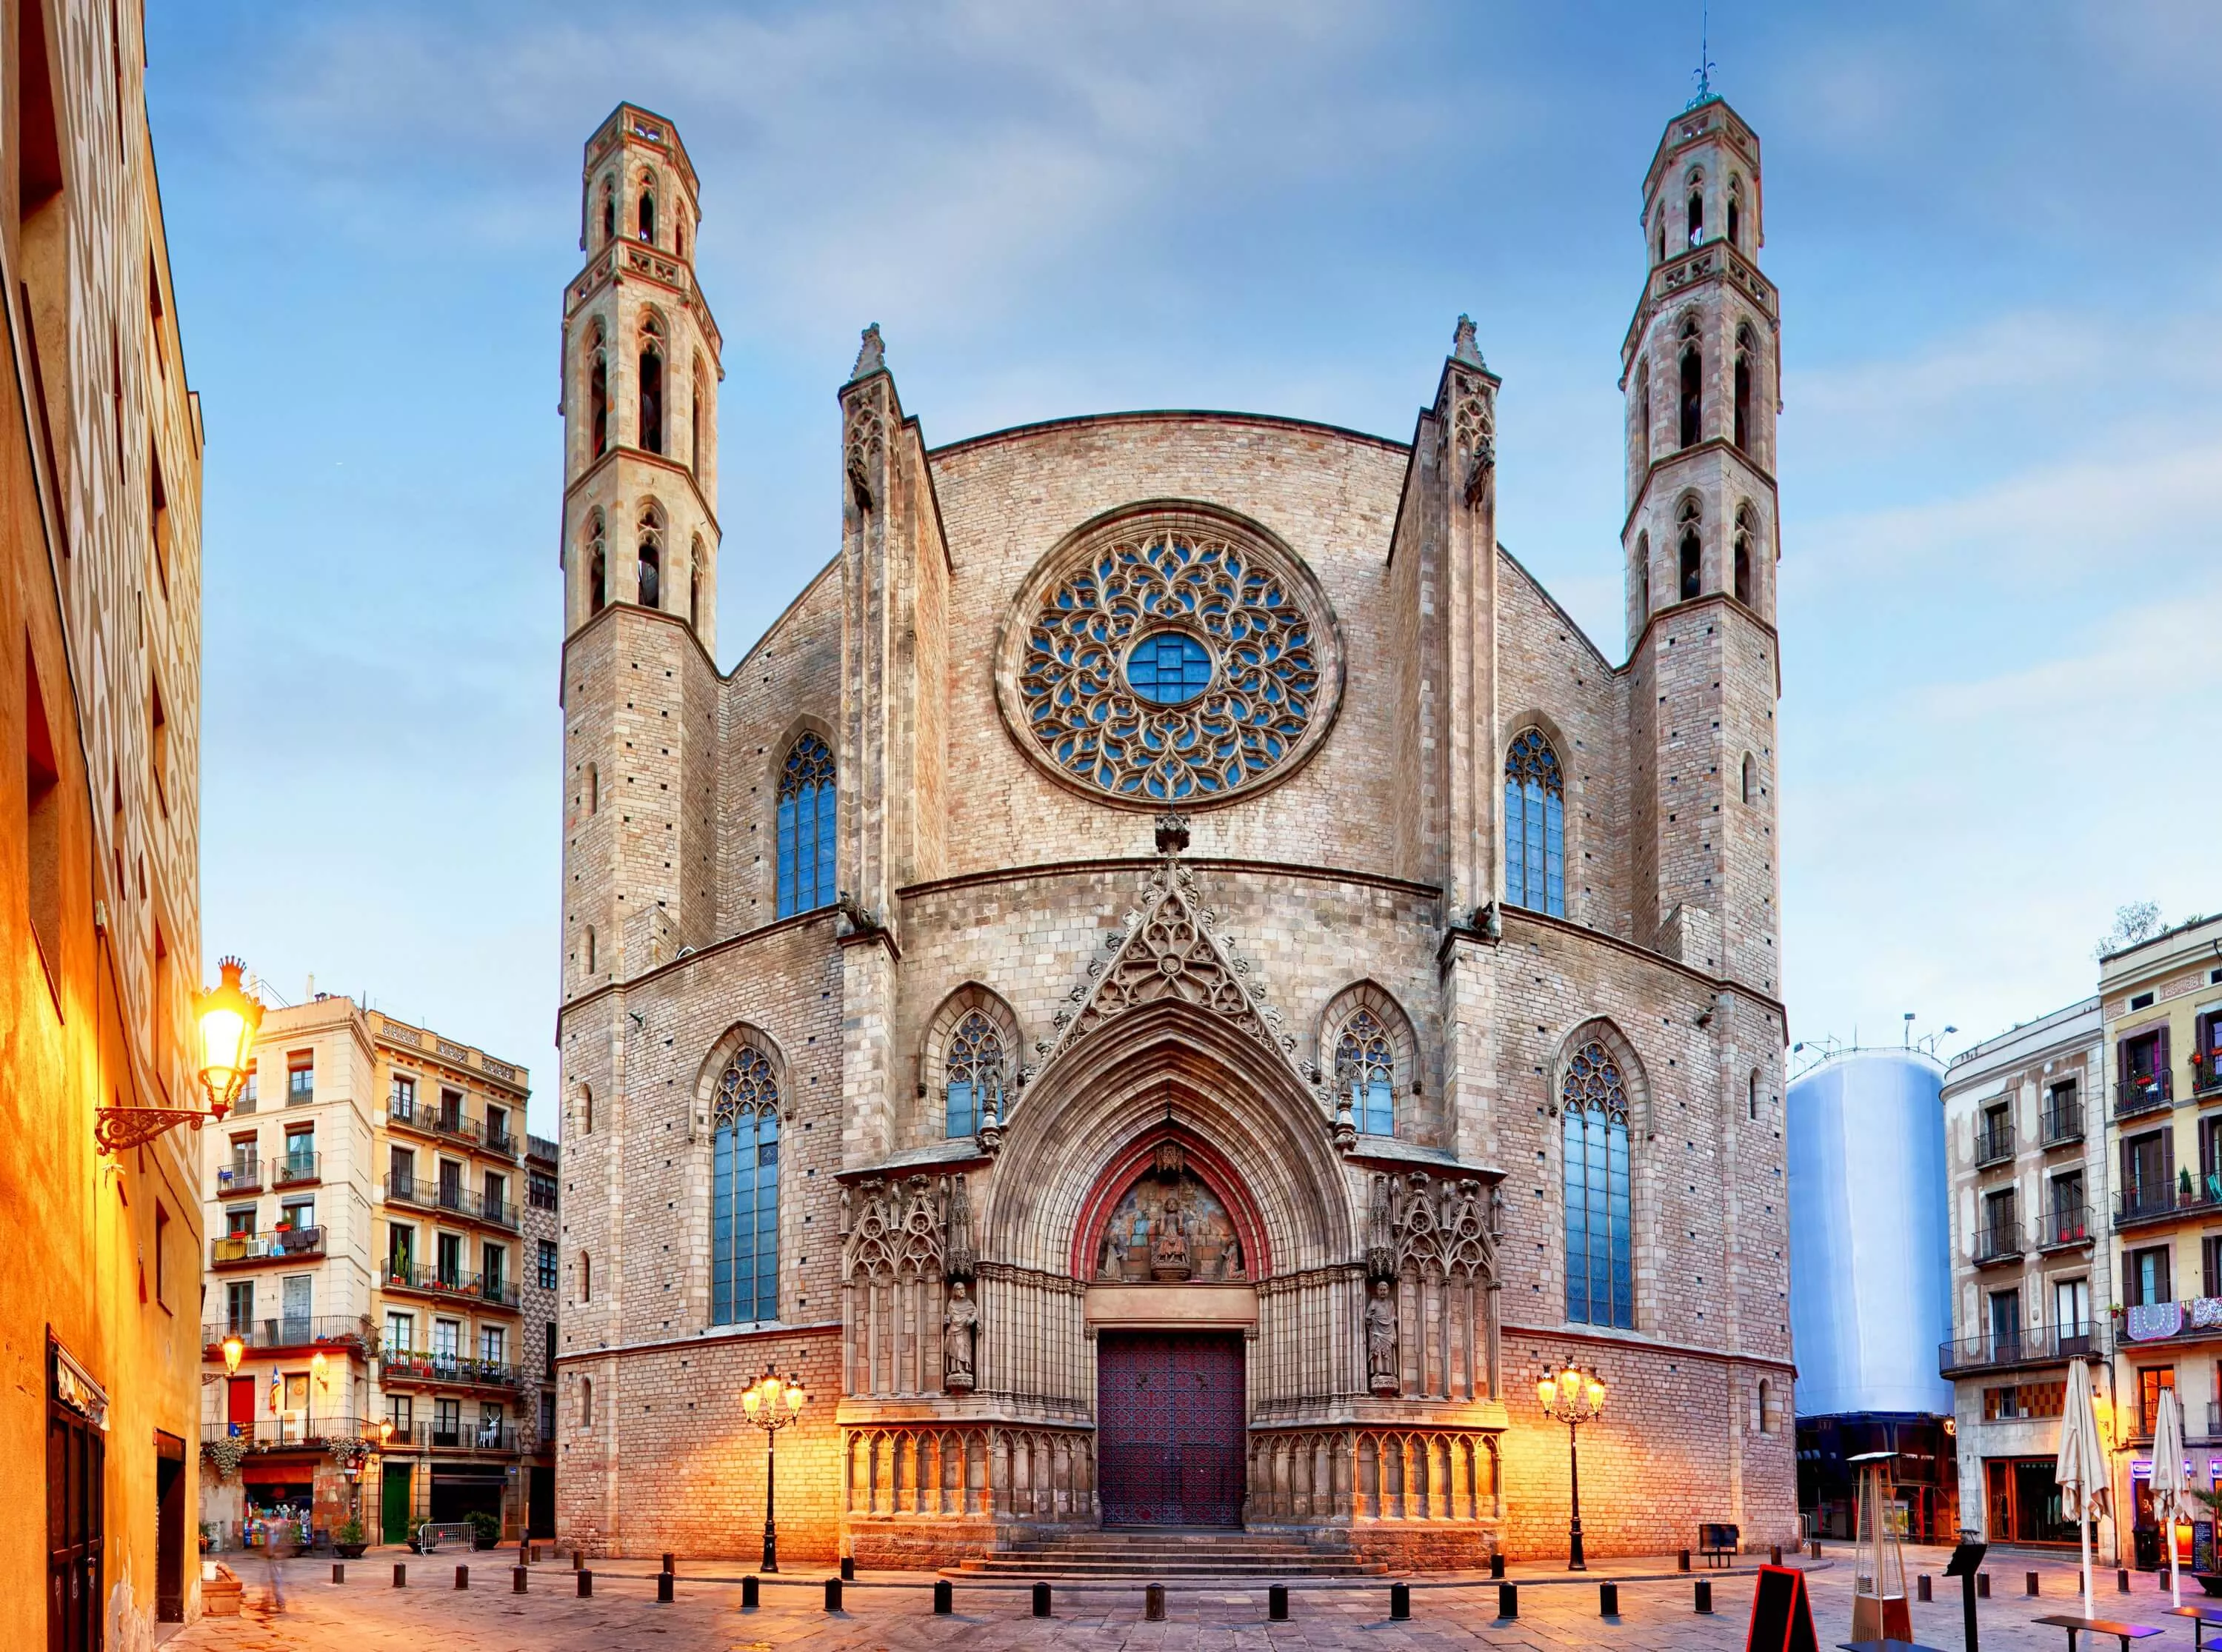 Santa Maria del Mar in Spain, Europe | Architecture - Rated 4.4